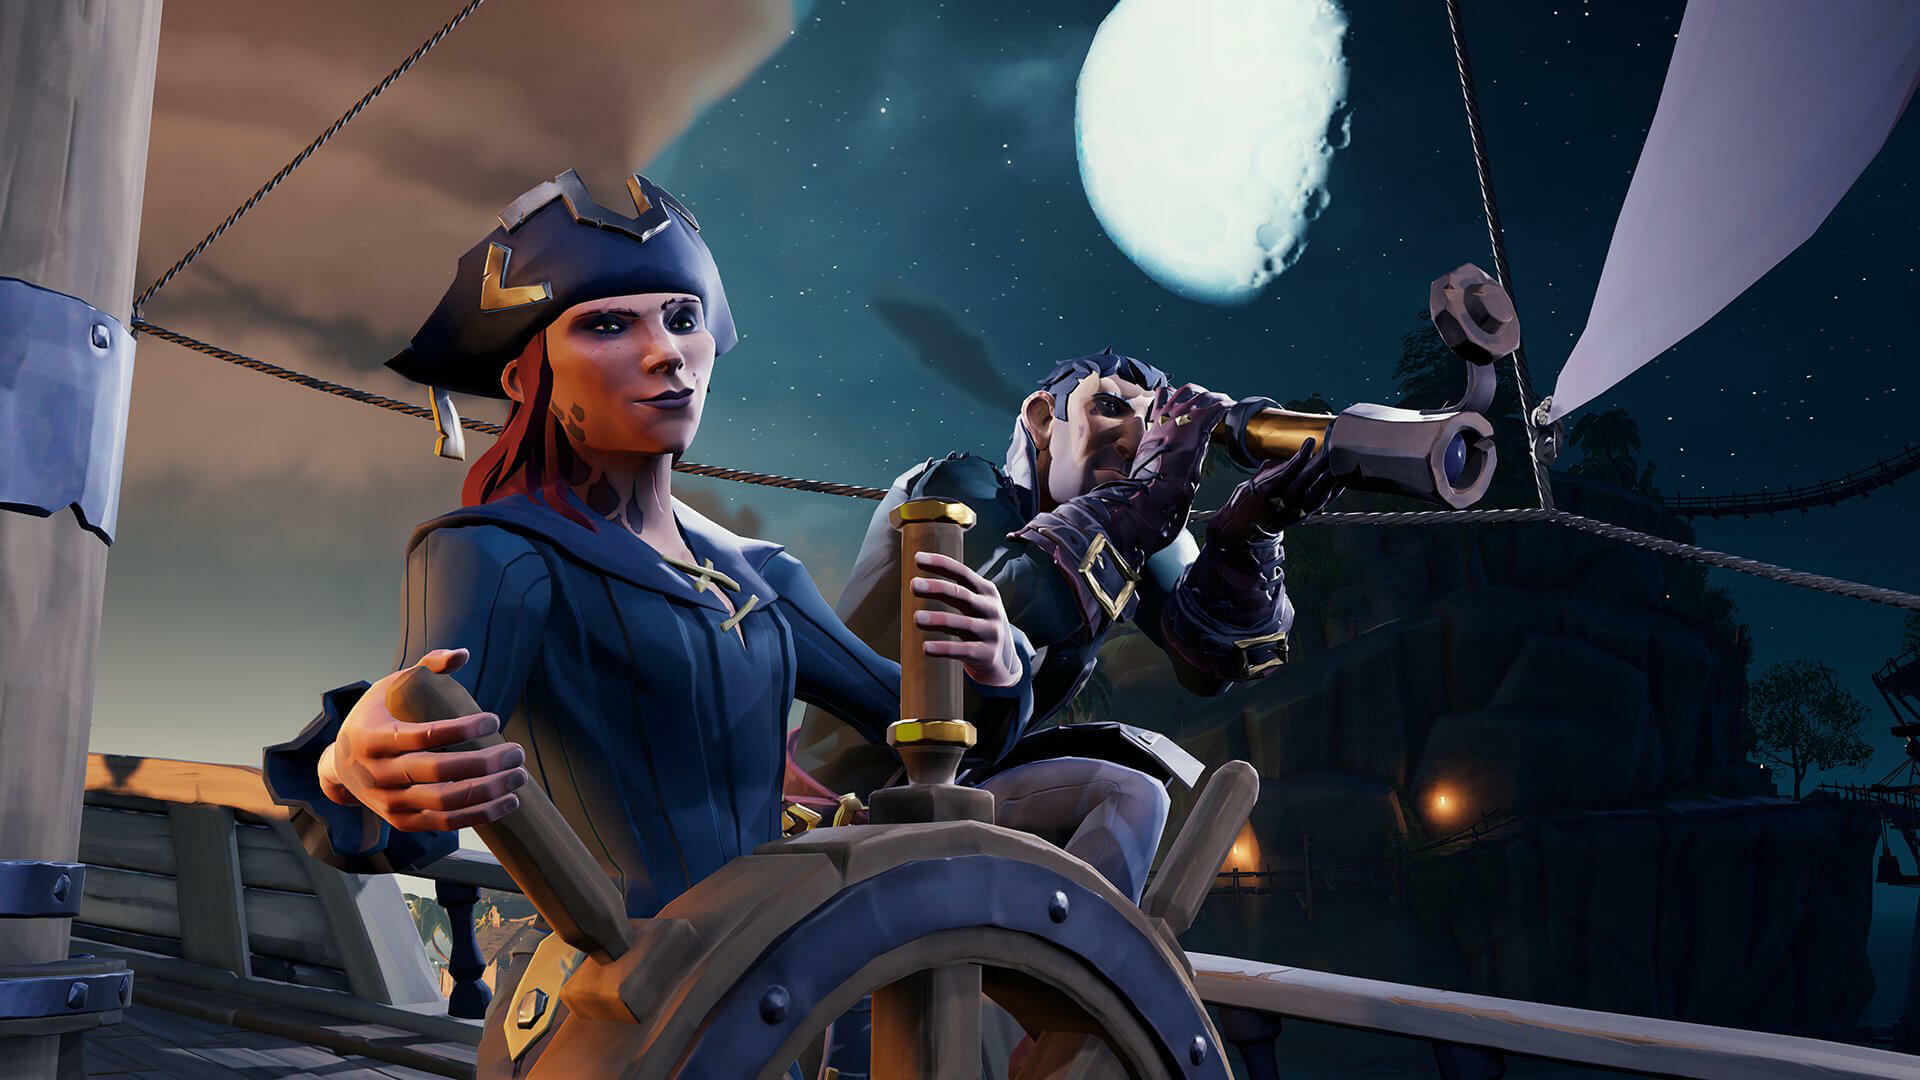 Sea of Thieves A Pirate's Life Gameplay Trailer - Niche Gamer